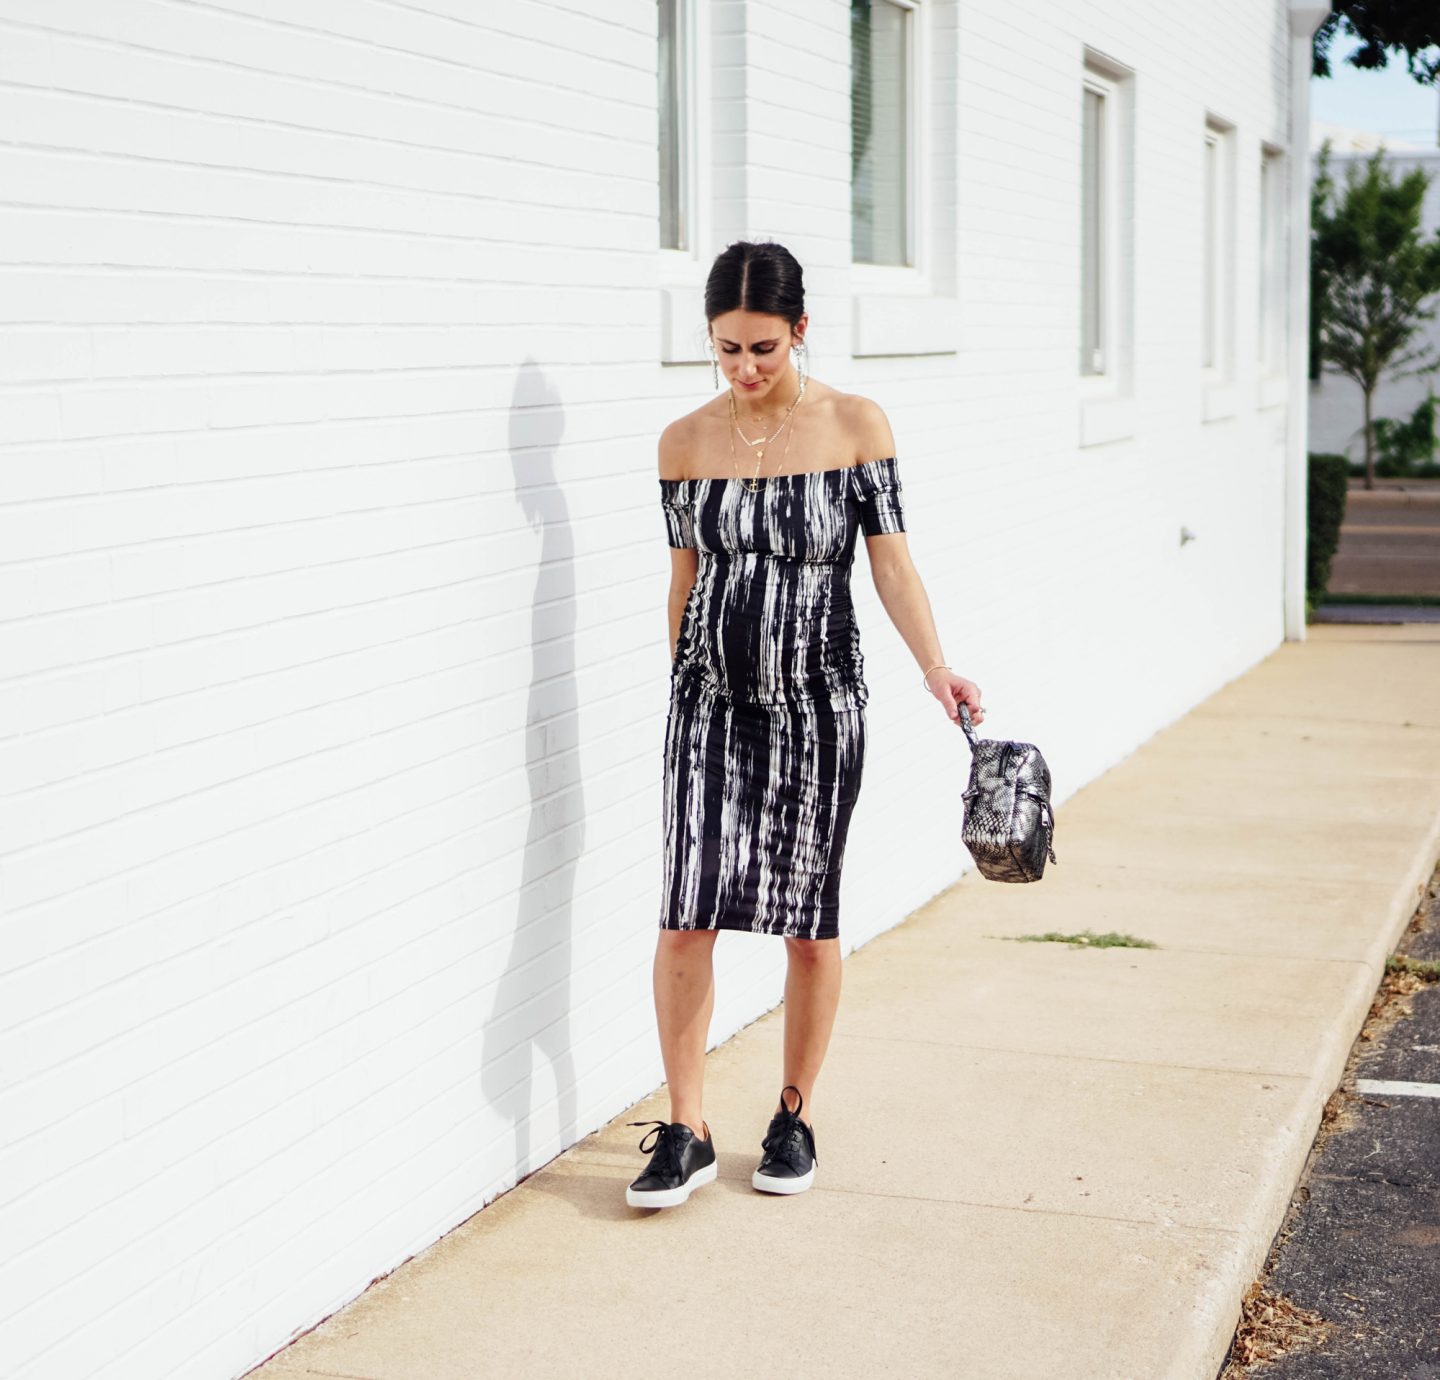 I'm sharing this super-flattering fitted maternity dress on TheDandyLiar.com, along with 32 things about me in honor of my 32nd birthday! Don't miss the $700 Nordstrom giveaway at the end!